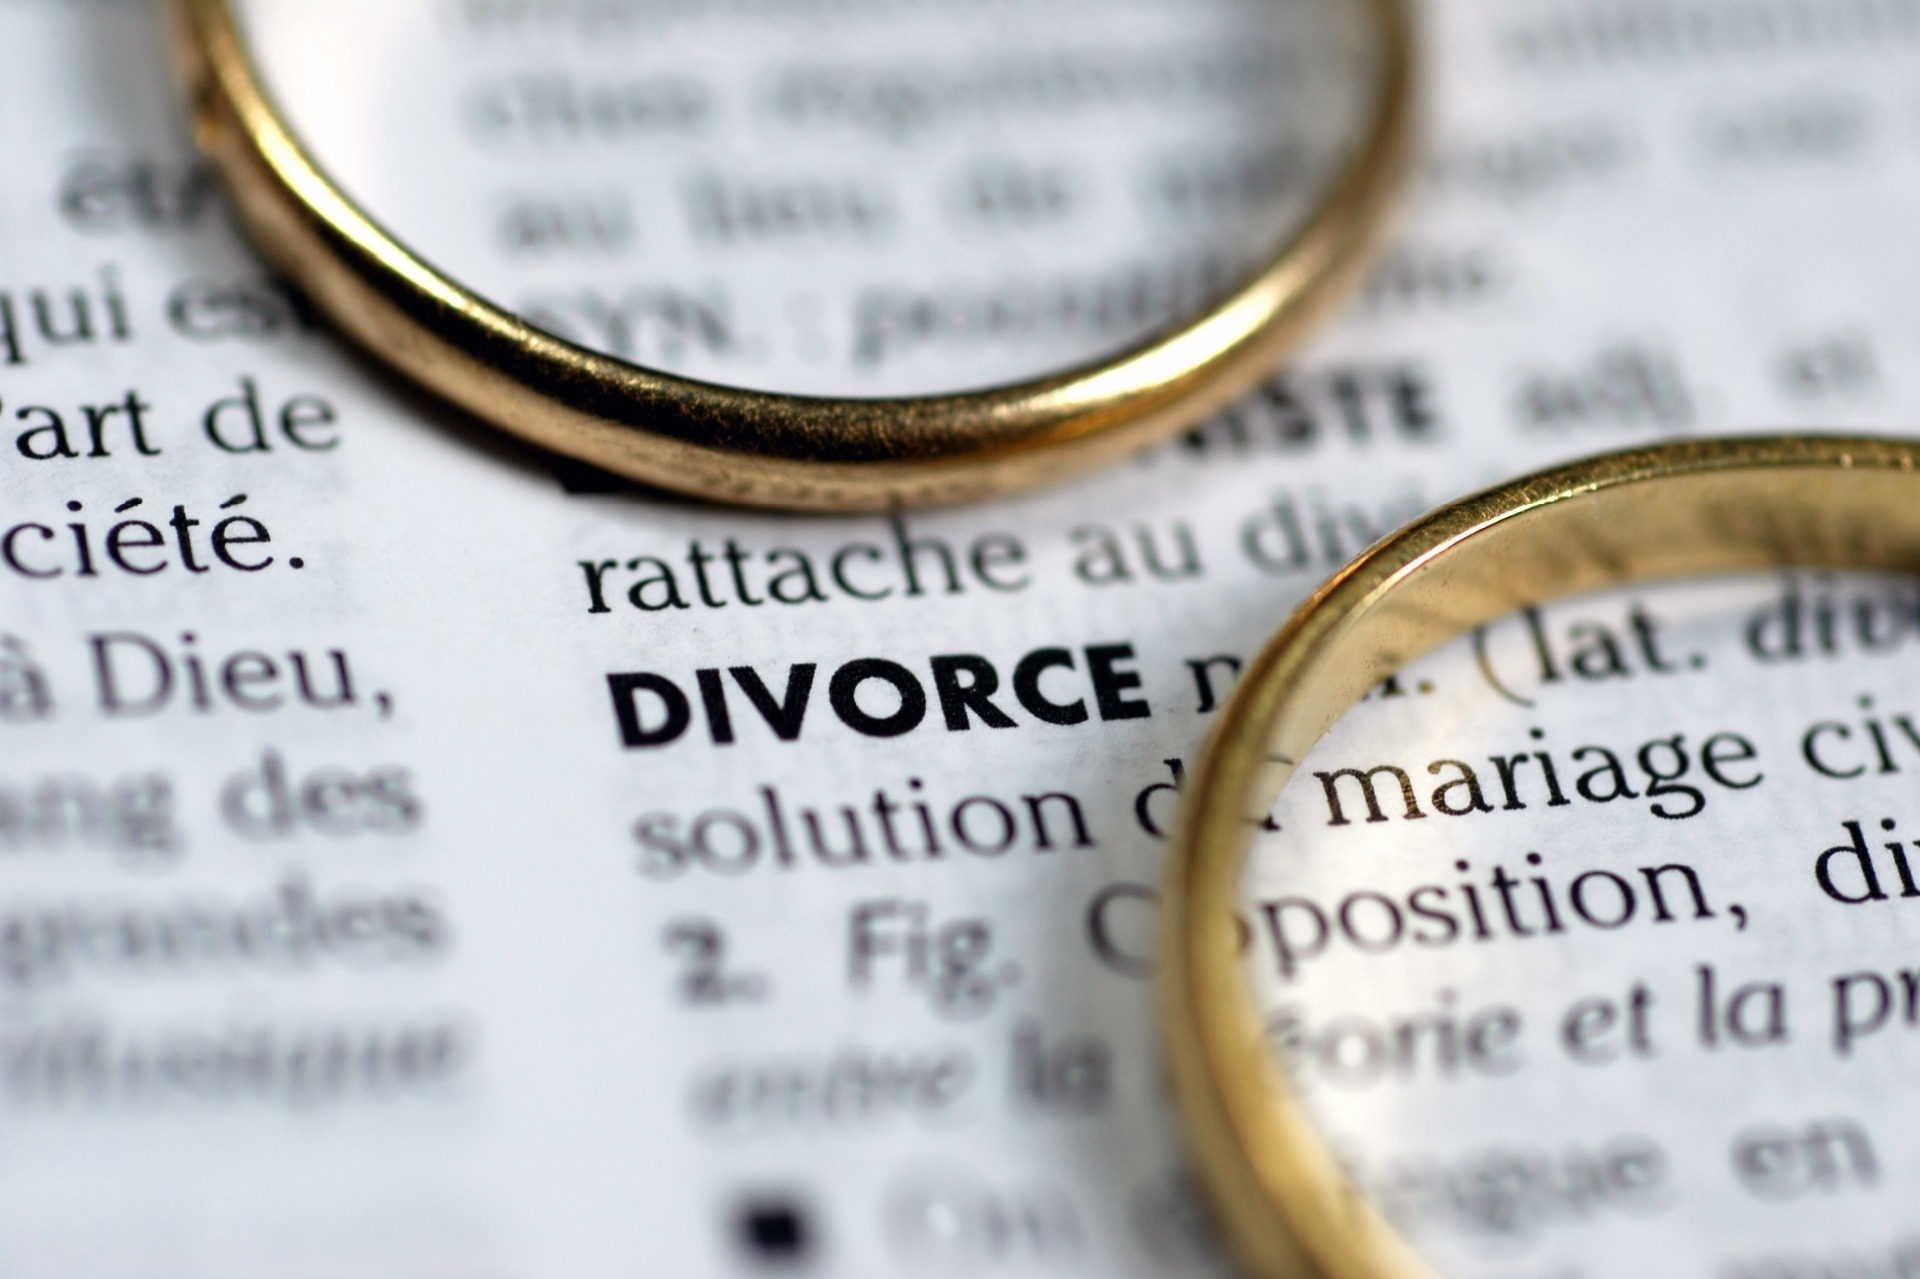 A dictionary with the word "divorce" shown, with two wedding bands on top; our Wills Solicitors in Lancaster discuss how divorce impacts a Will.